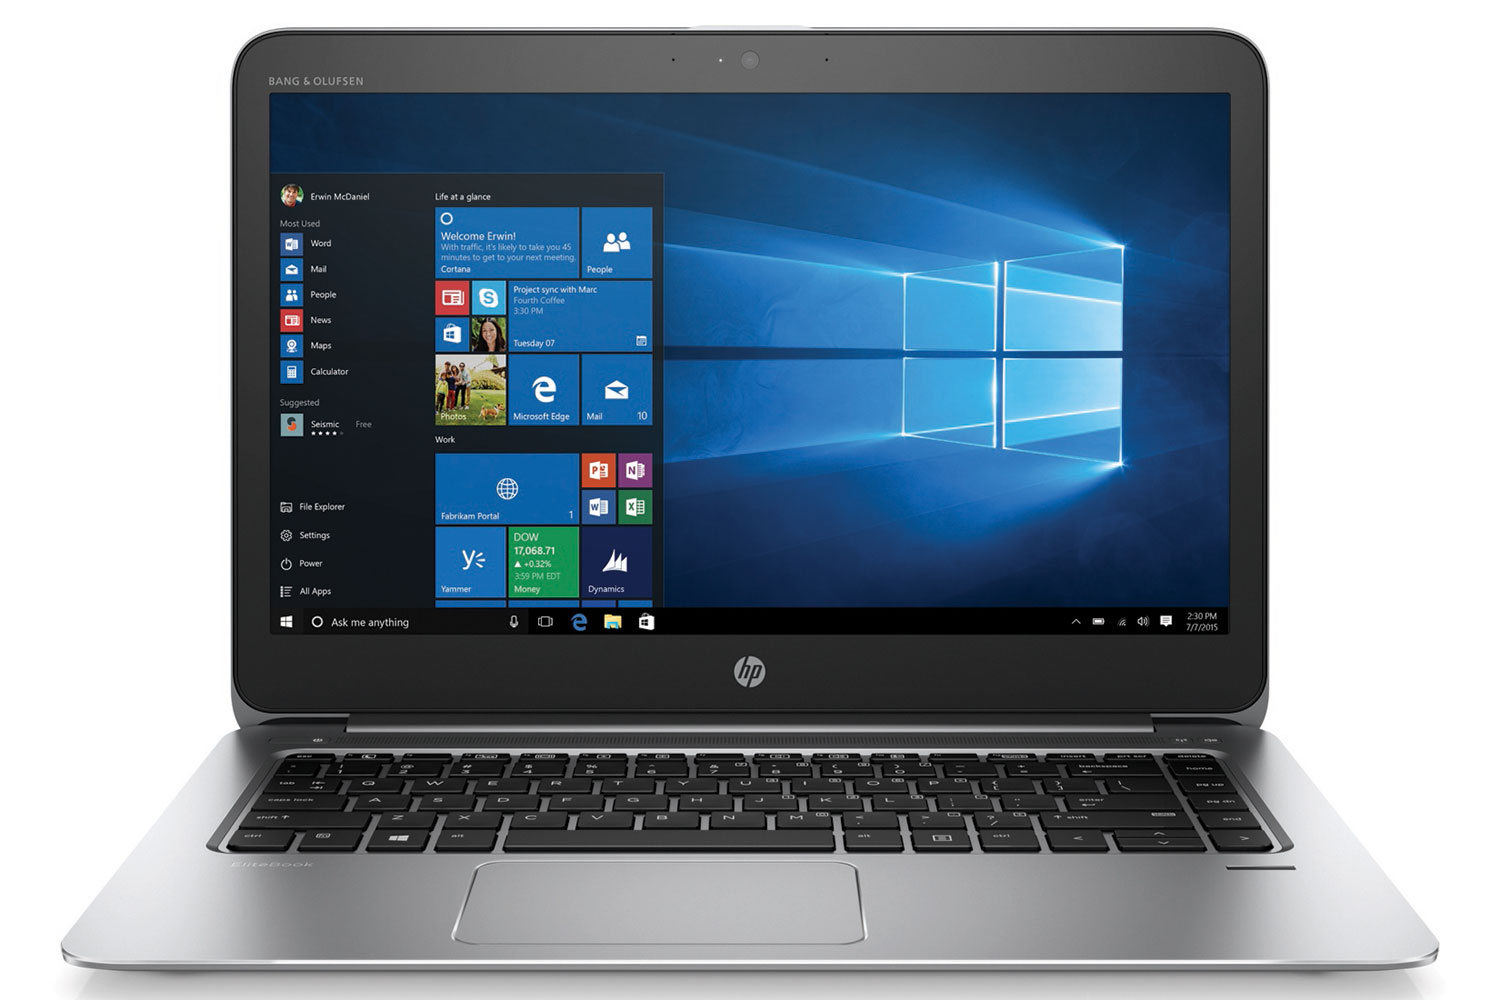 hps new elitebook folio is a half inch thick laptop with 4k display hp 1040 g3 hp20150916653